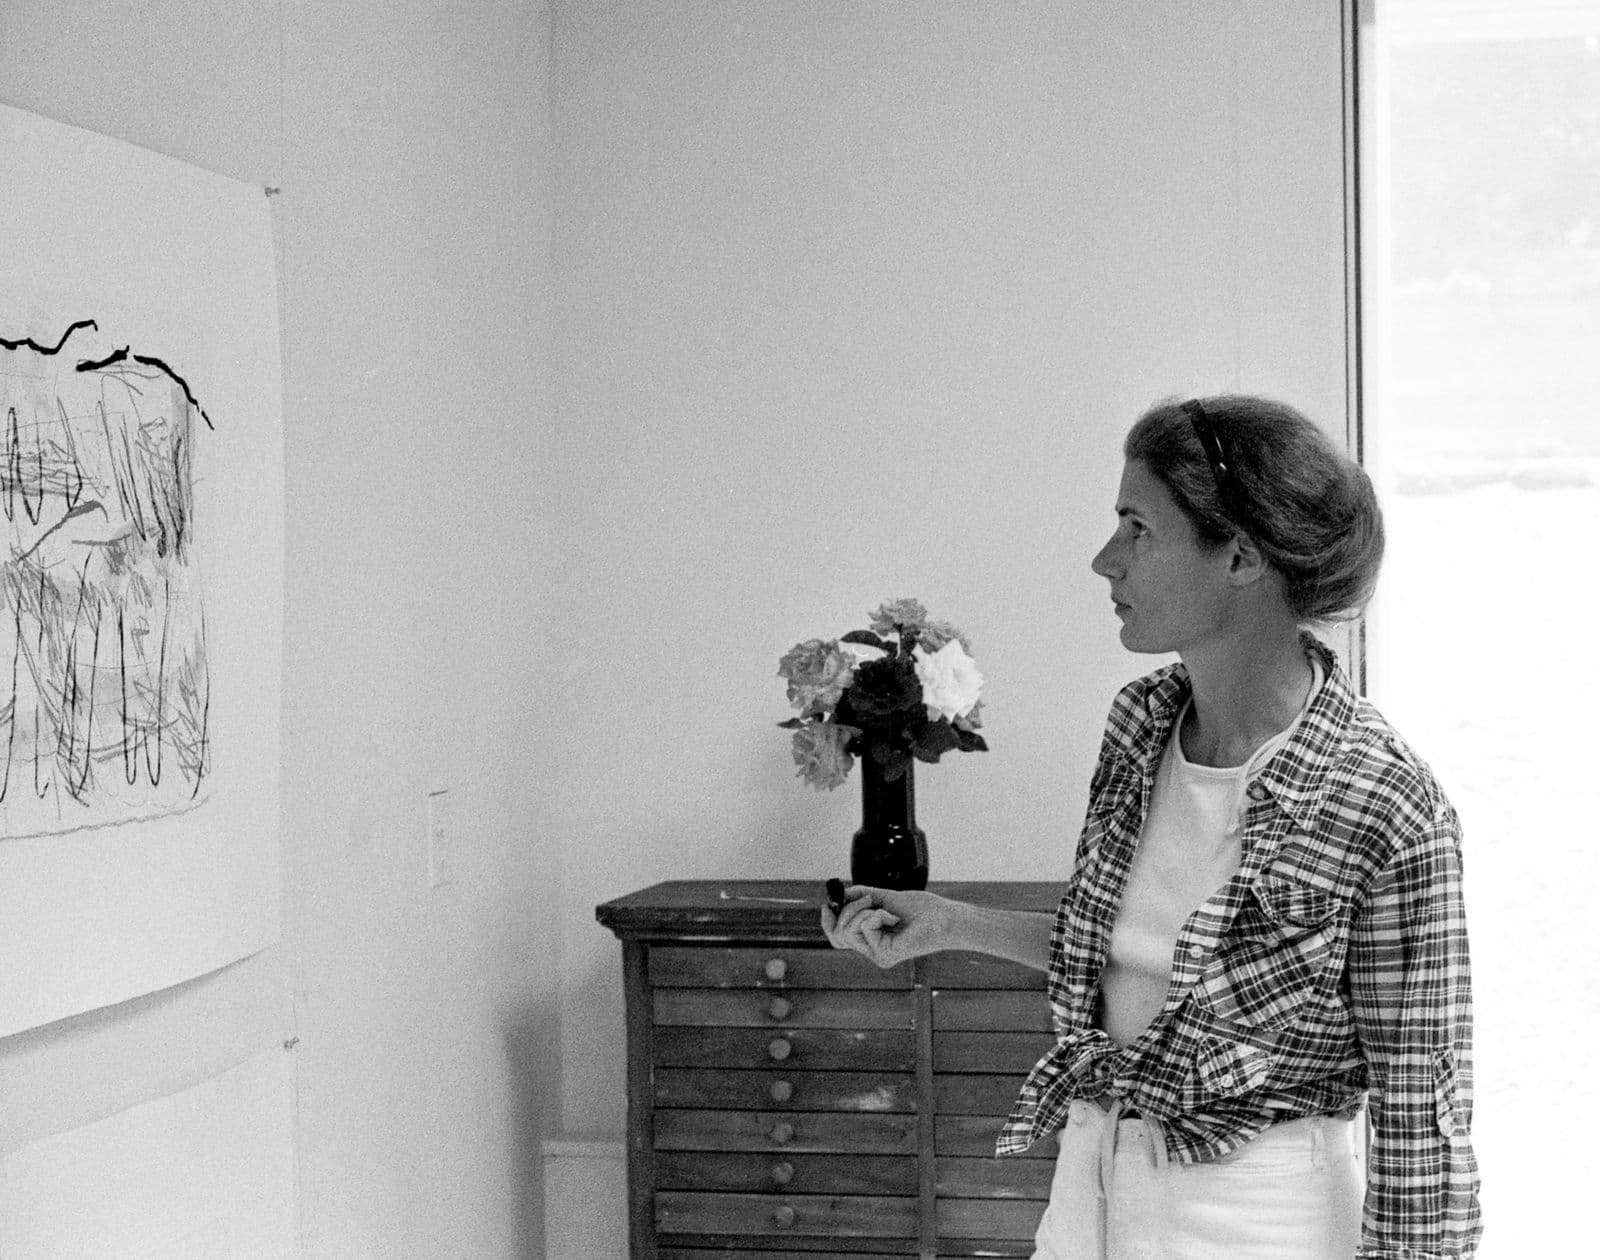 A woman in a room looking at artwork on a wall